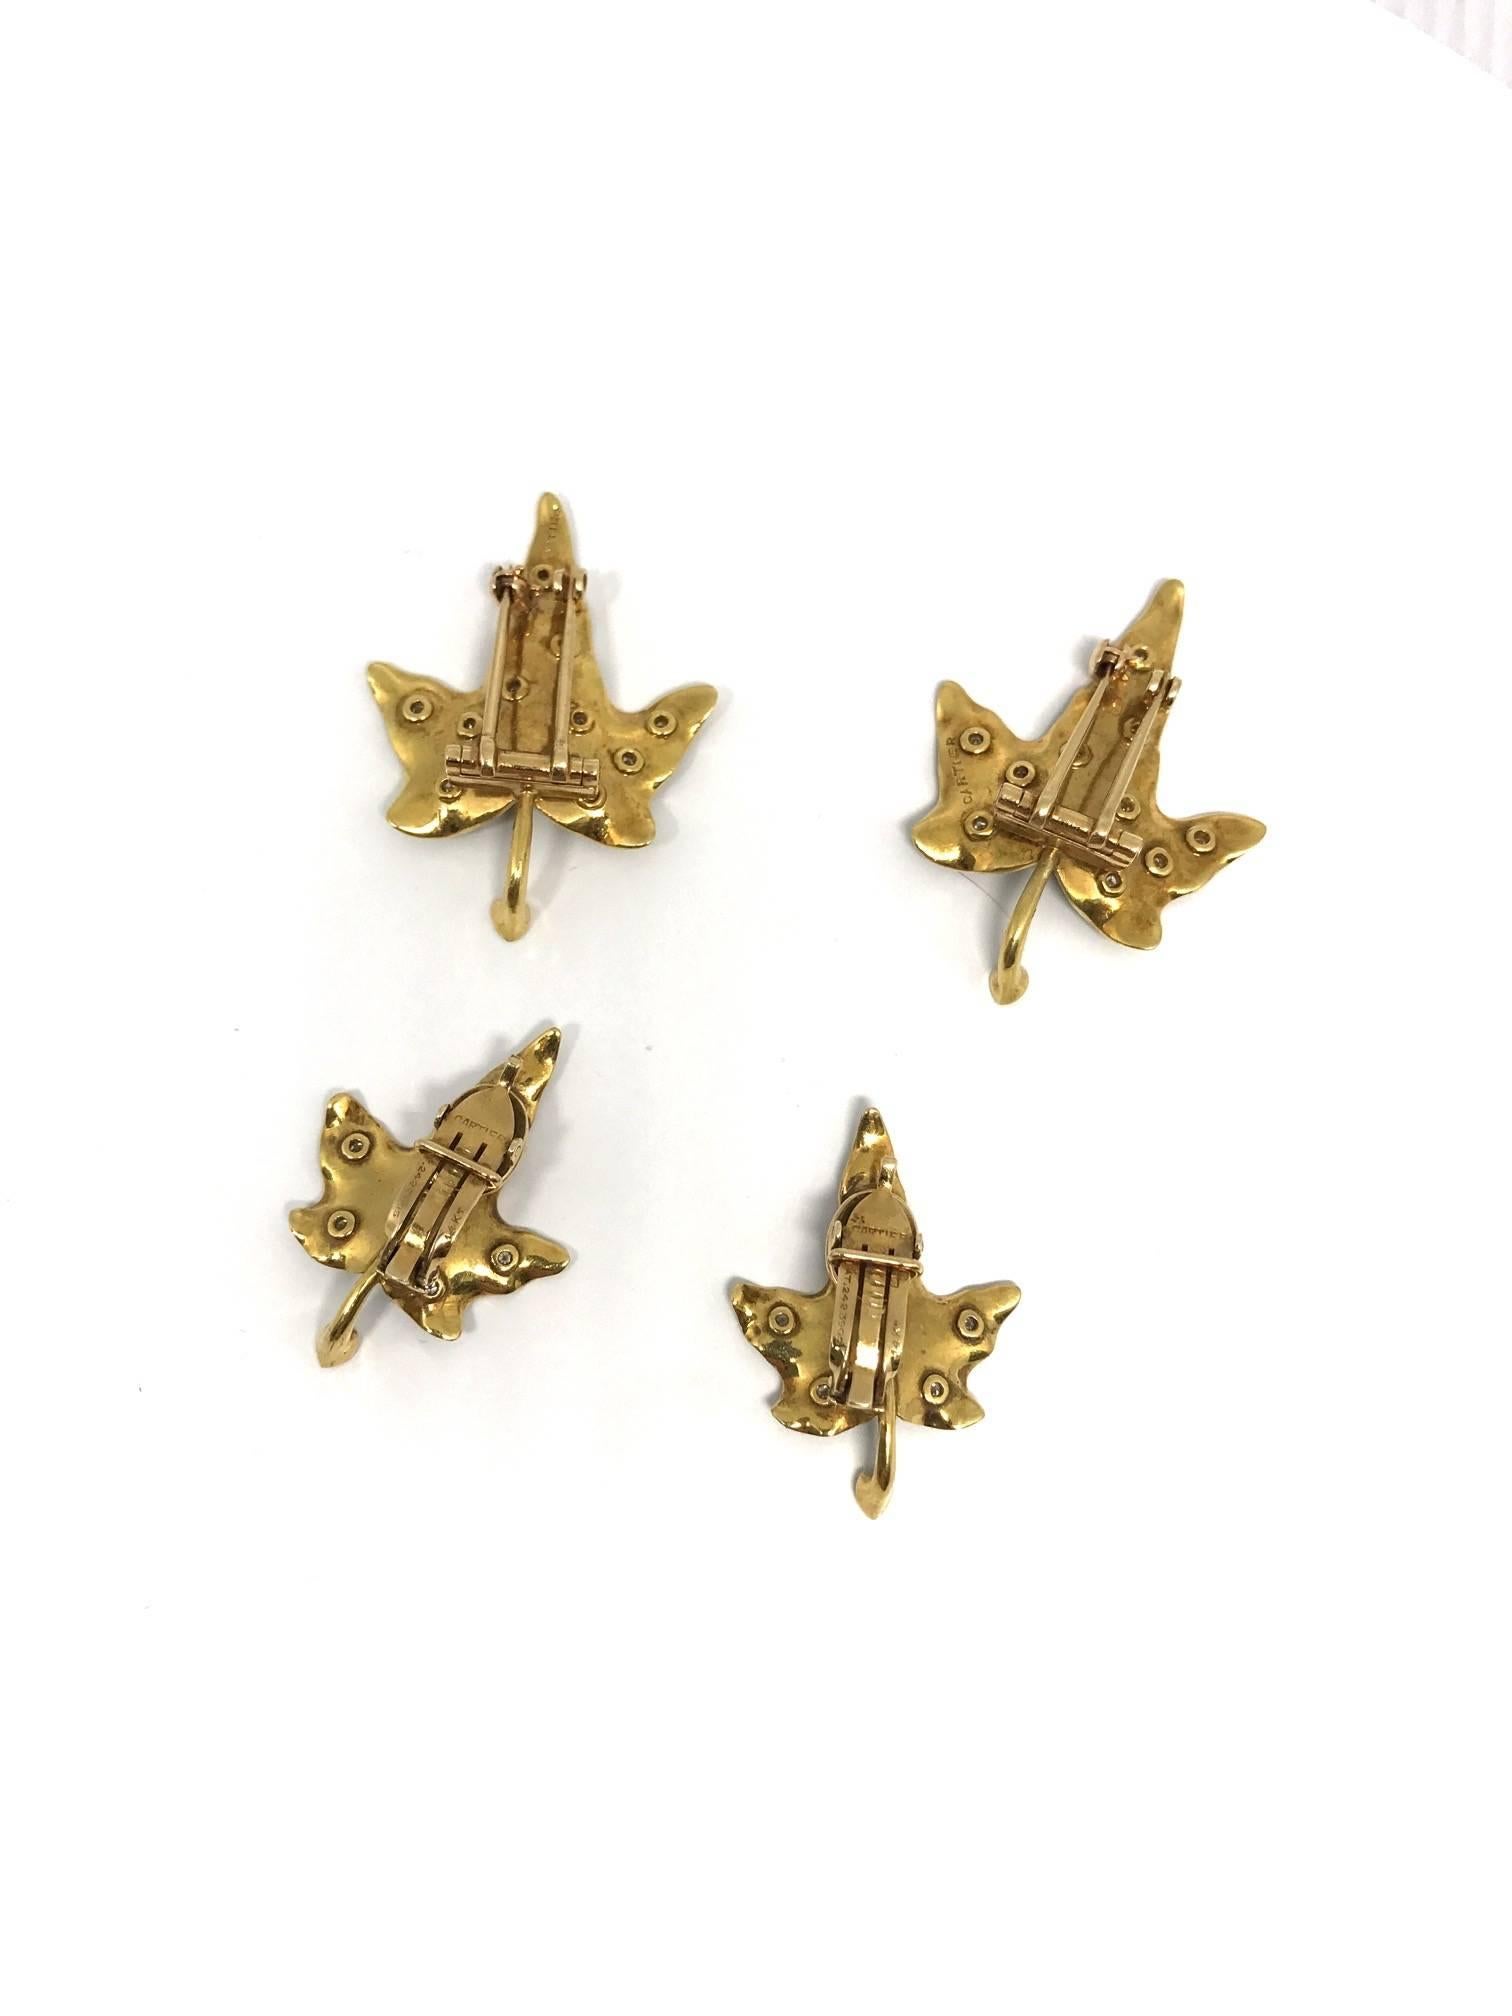 This whimsical set of four beautiful ivy leafs (2 brooches and ear clips) features leaf details complimented by diamonds (~0.5 ct). Organic yet polished, this set is truly special. 
Circa 1950, 14k yellow gold, made by the famous French house